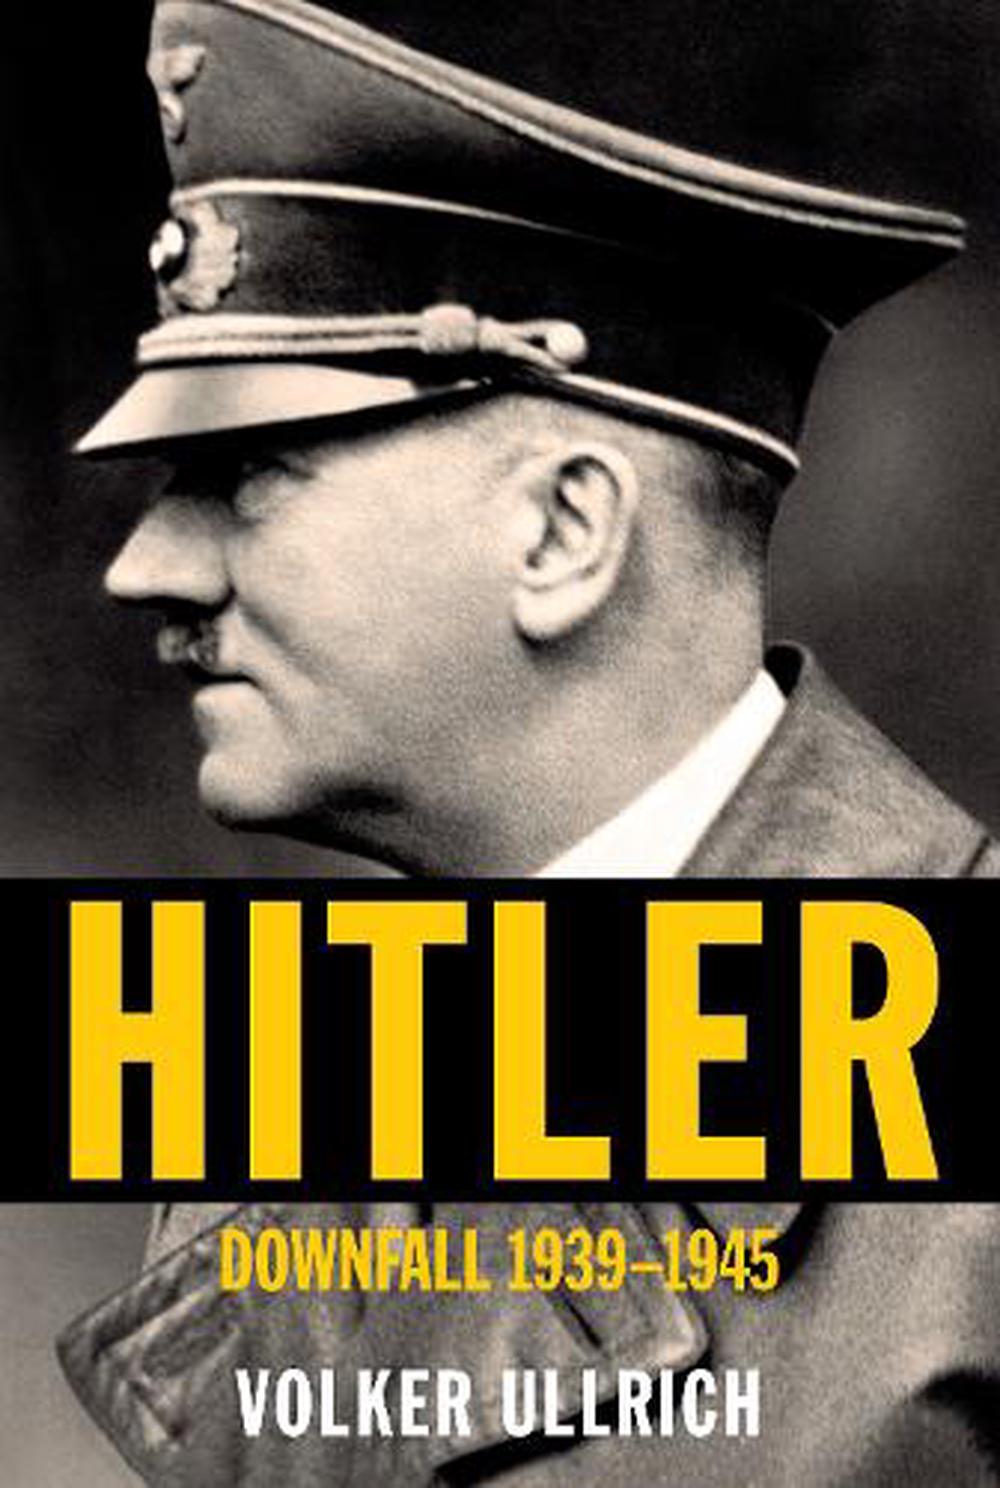 Hitler: Downfall: 1939-1945 by Volker Ullrich (English) Hardcover Book ...